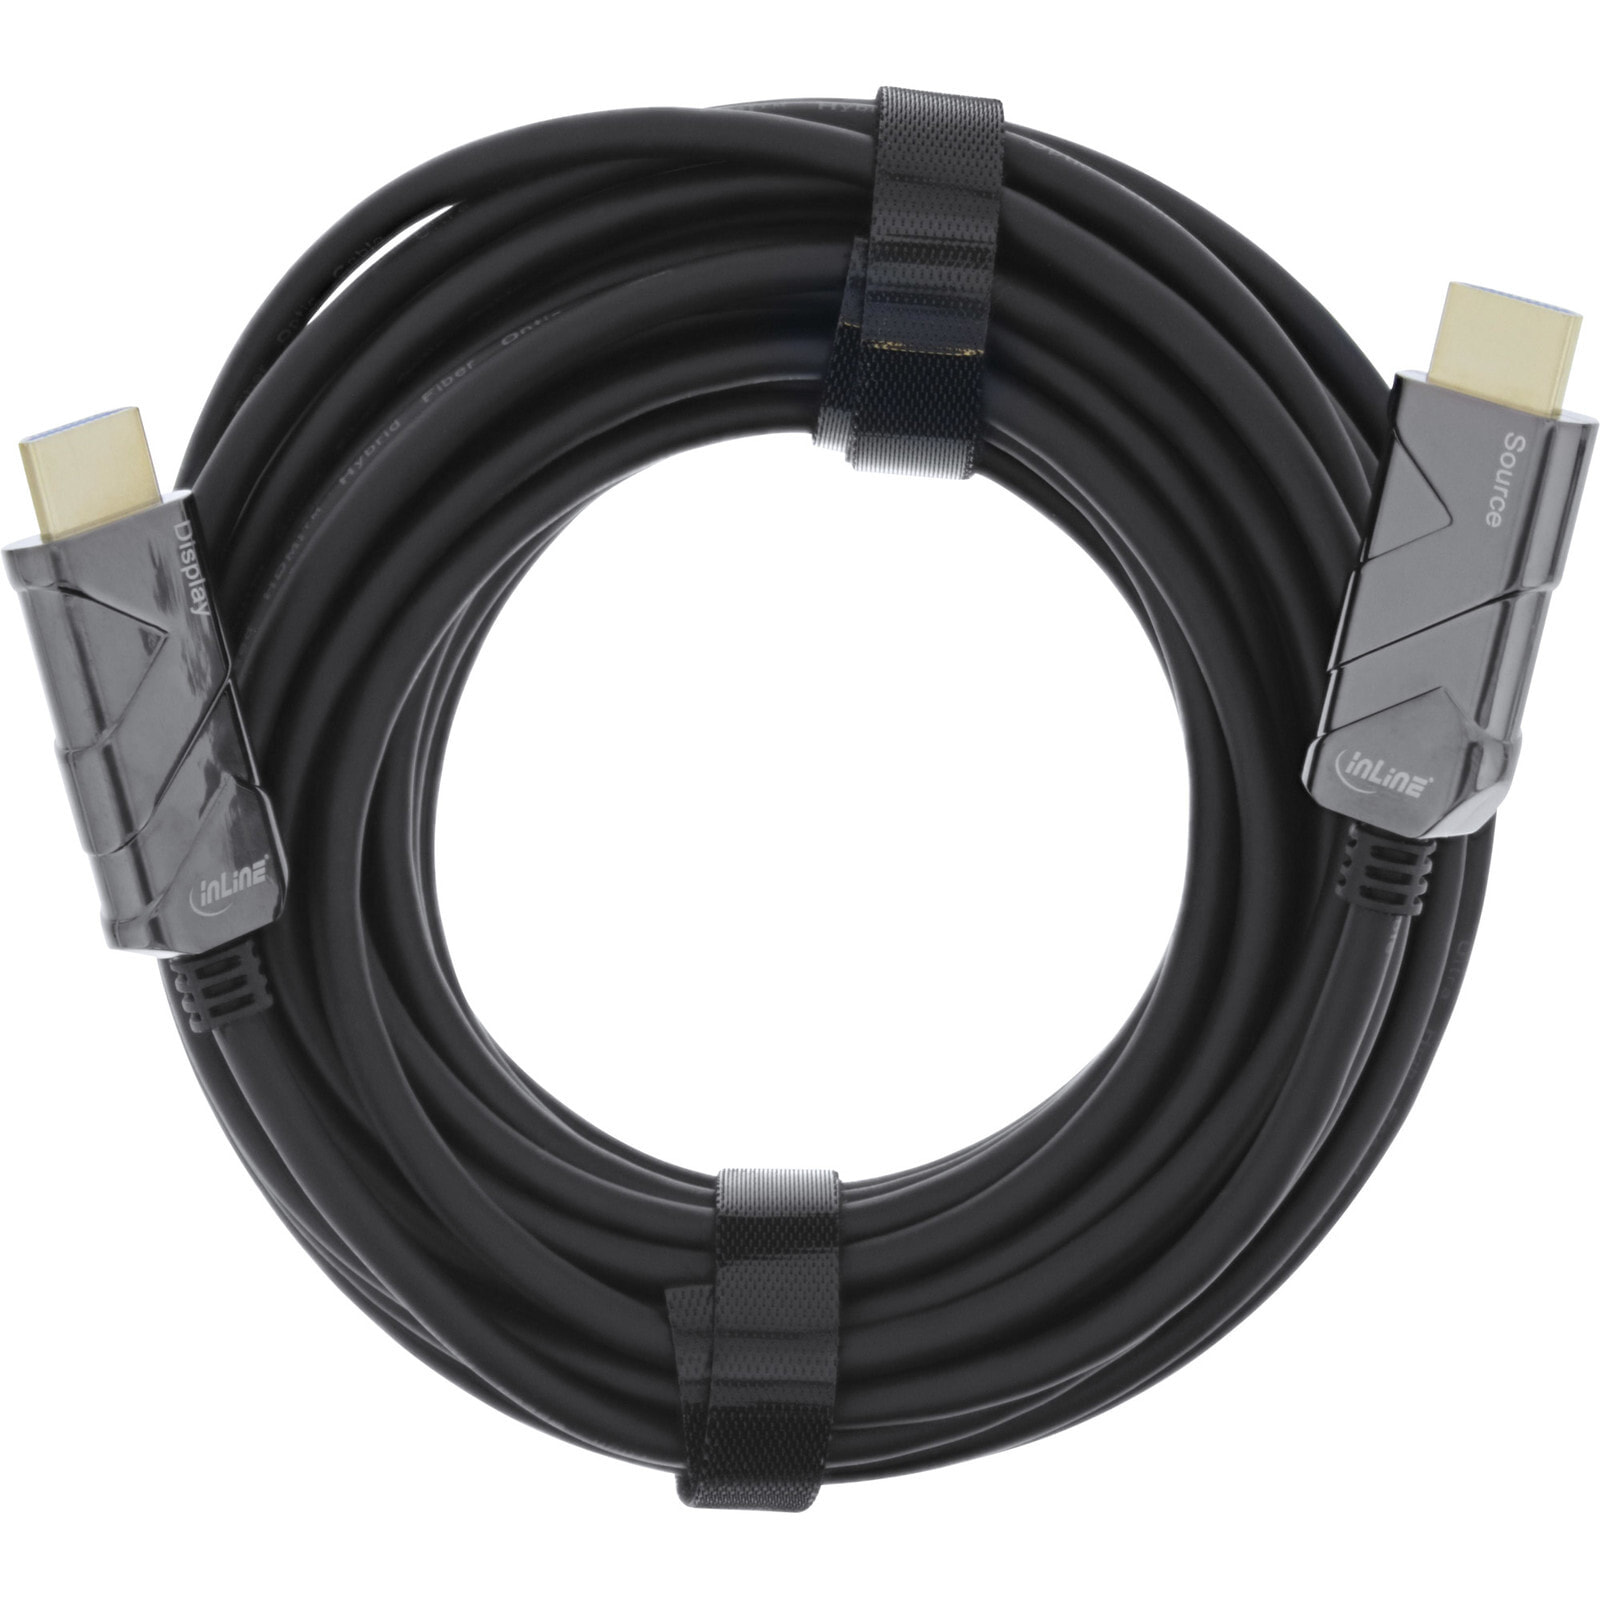 HDMI AOC Cable - Ultra High Speed HDMI Cable - 8K4K - black - 70m